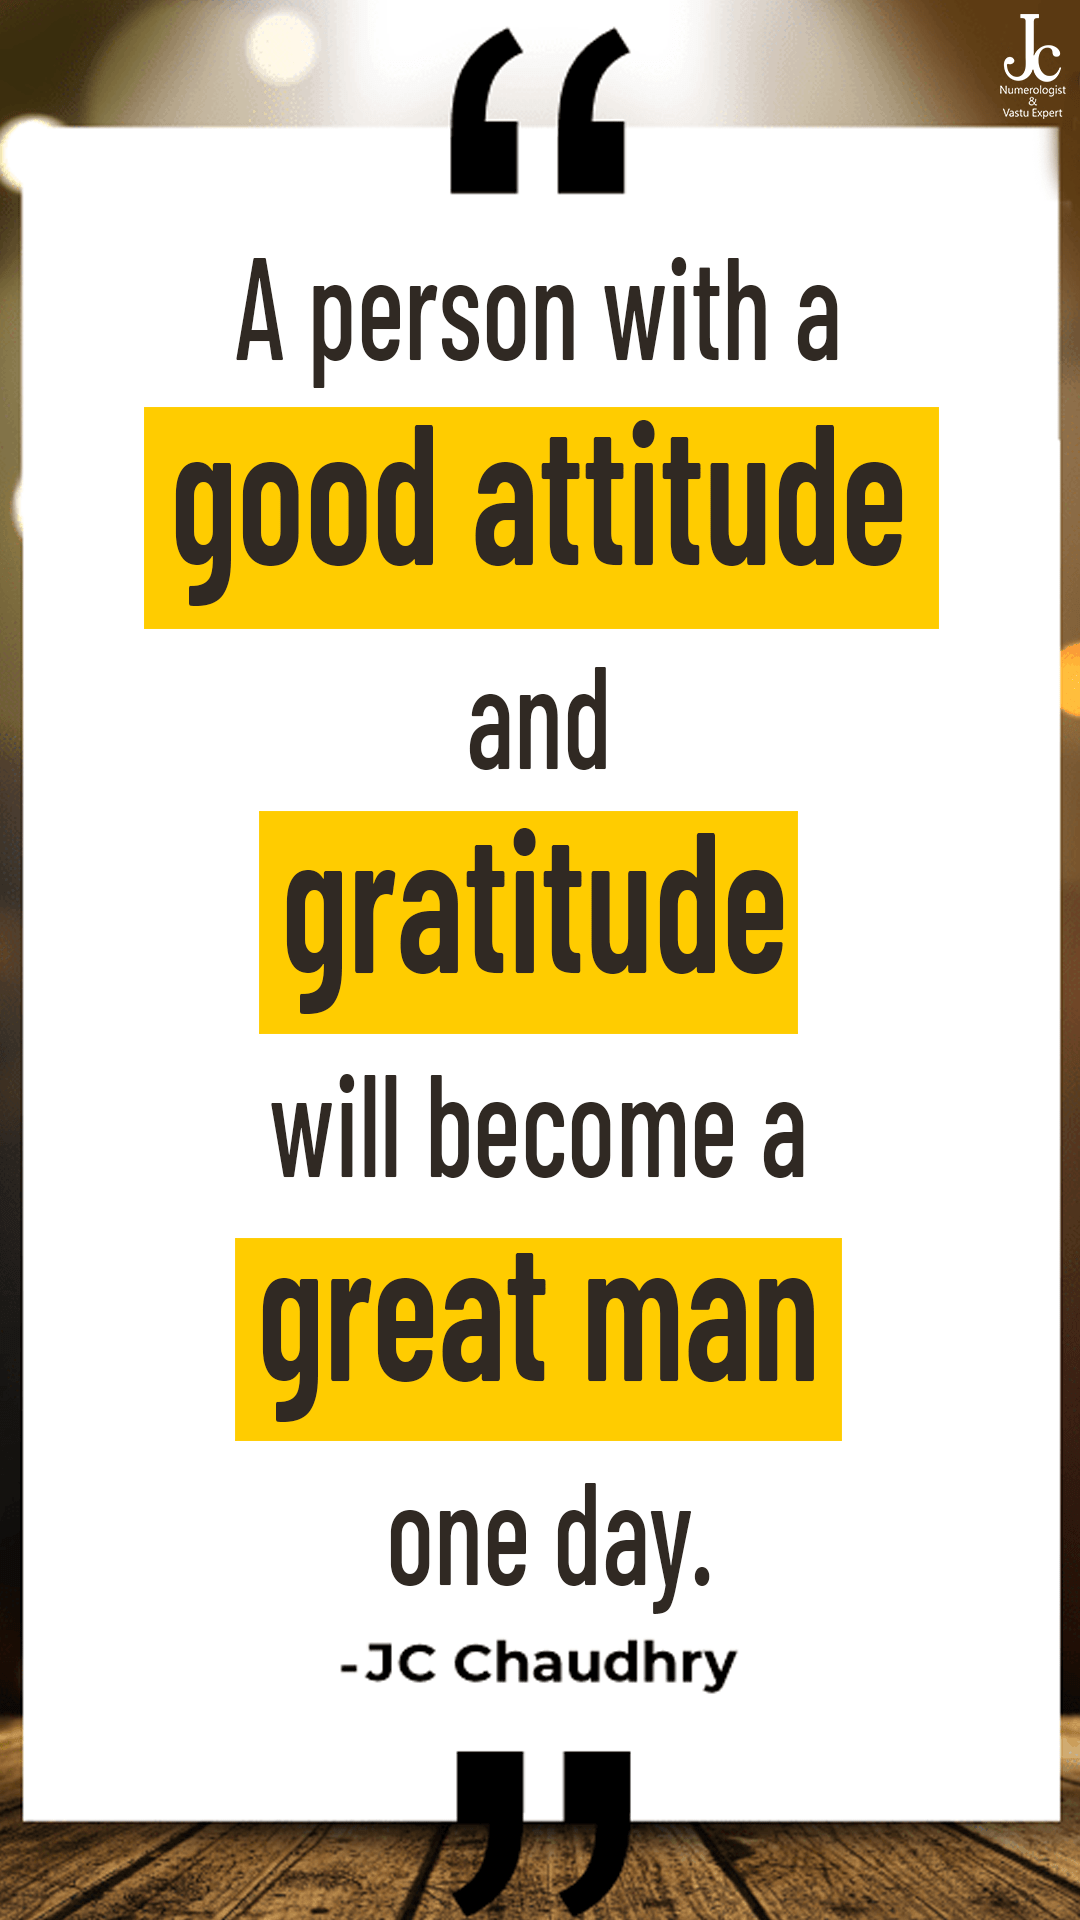 “A person with a good attitude and gratitude will become a great man one day.